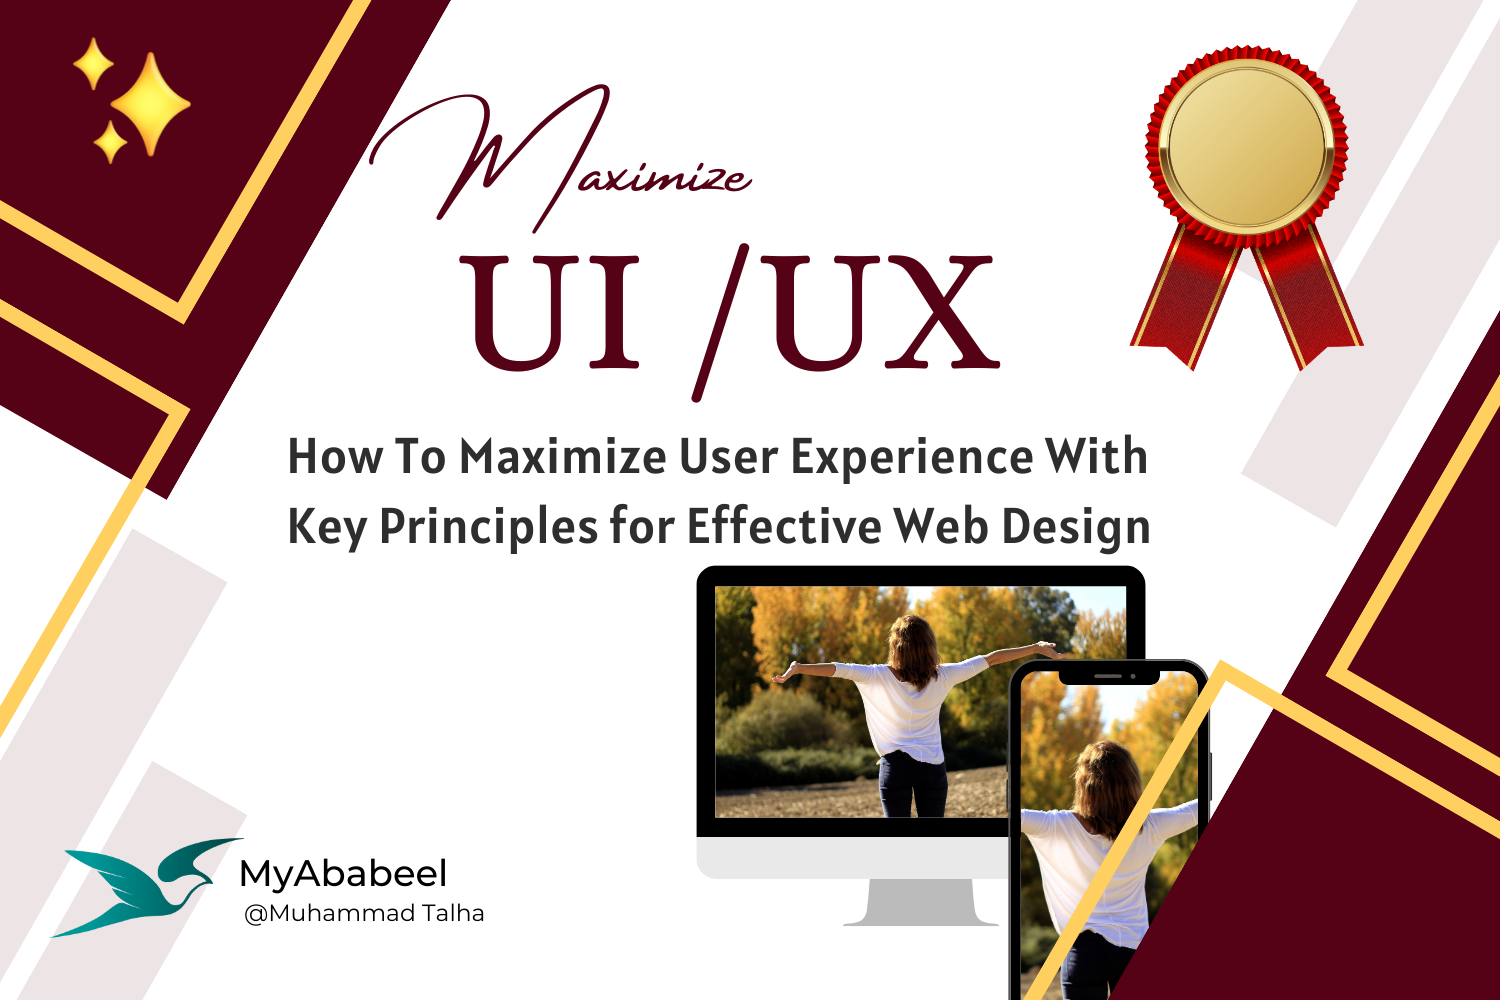 How To Maximize User Experience With Key Principles for Effective Web Design